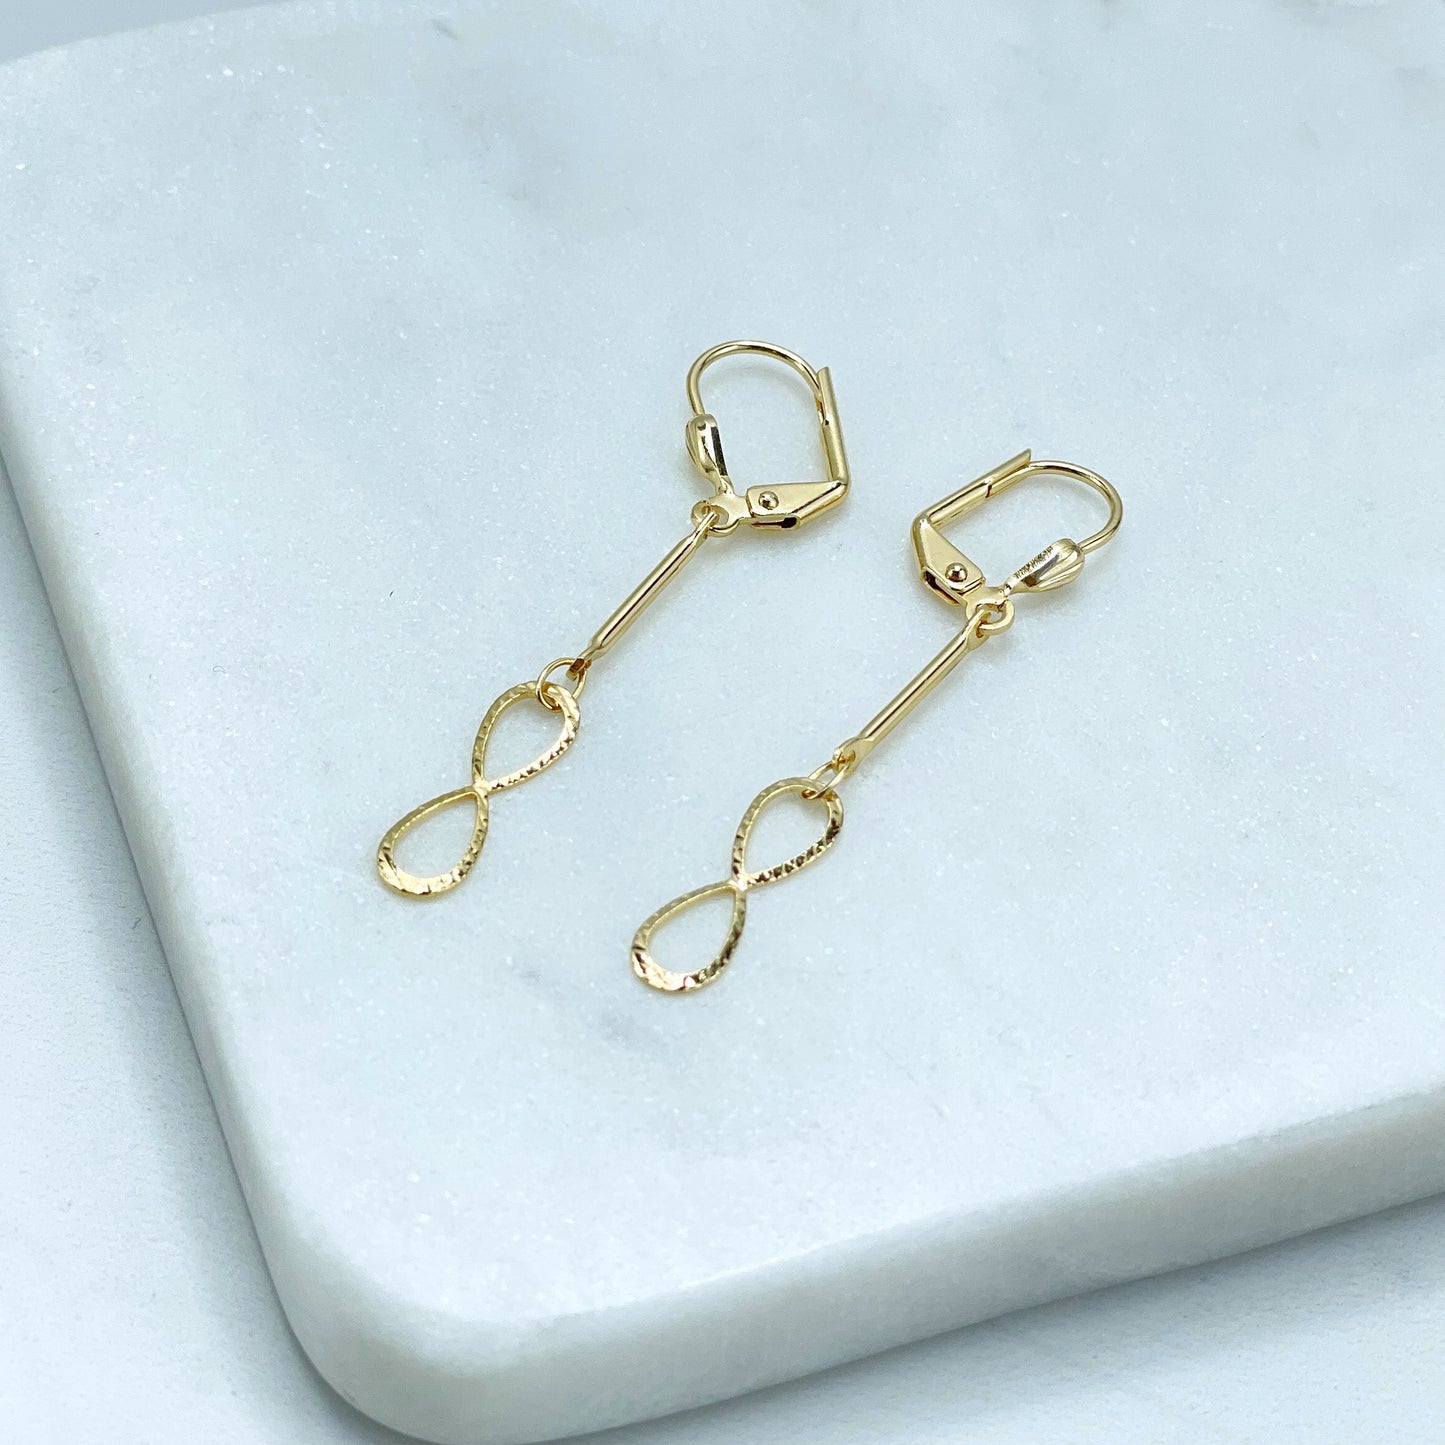 18k Gold Filled 5mm Infinity Sign Necklace or Bracelet or Earrings Set Wholesale Jewelry Supplies